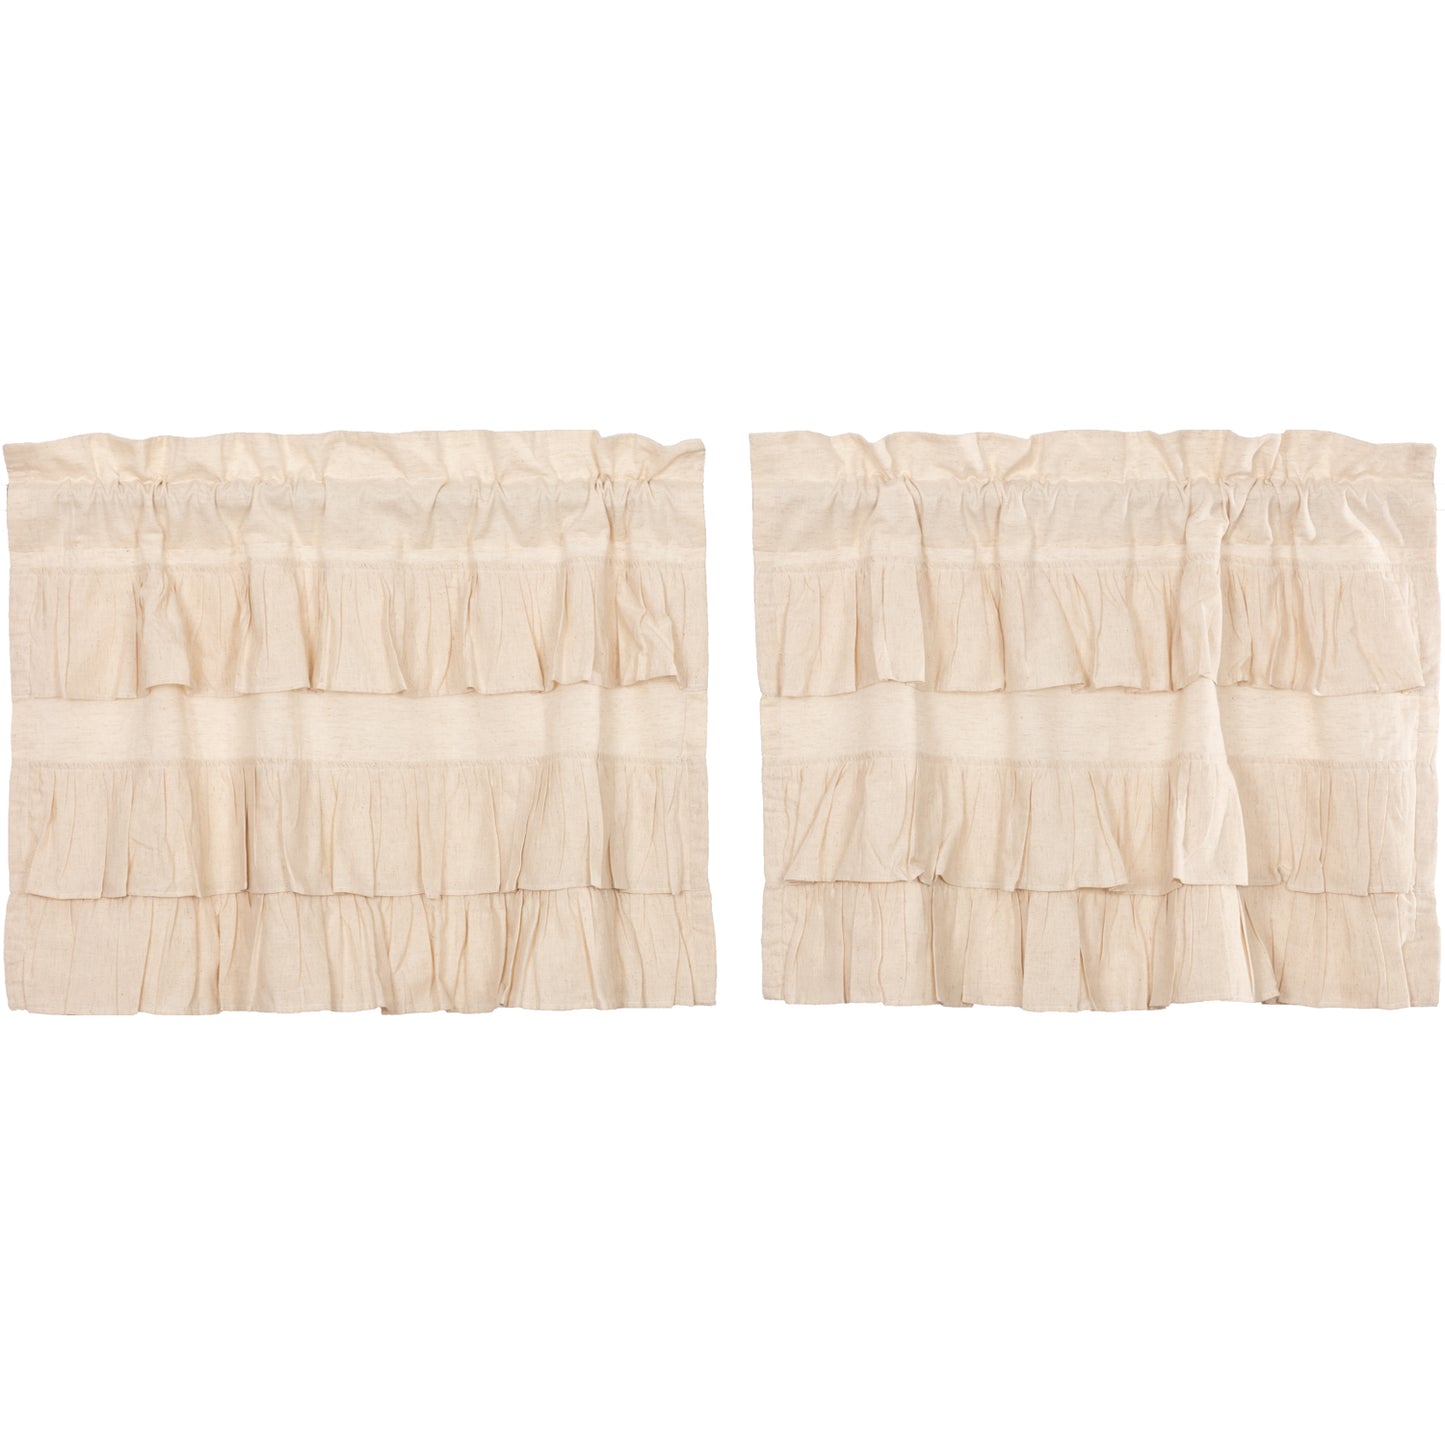 51968-Simple-Life-Flax-Natural-Ruffled-Tier-Set-of-2-L24xW36-image-6